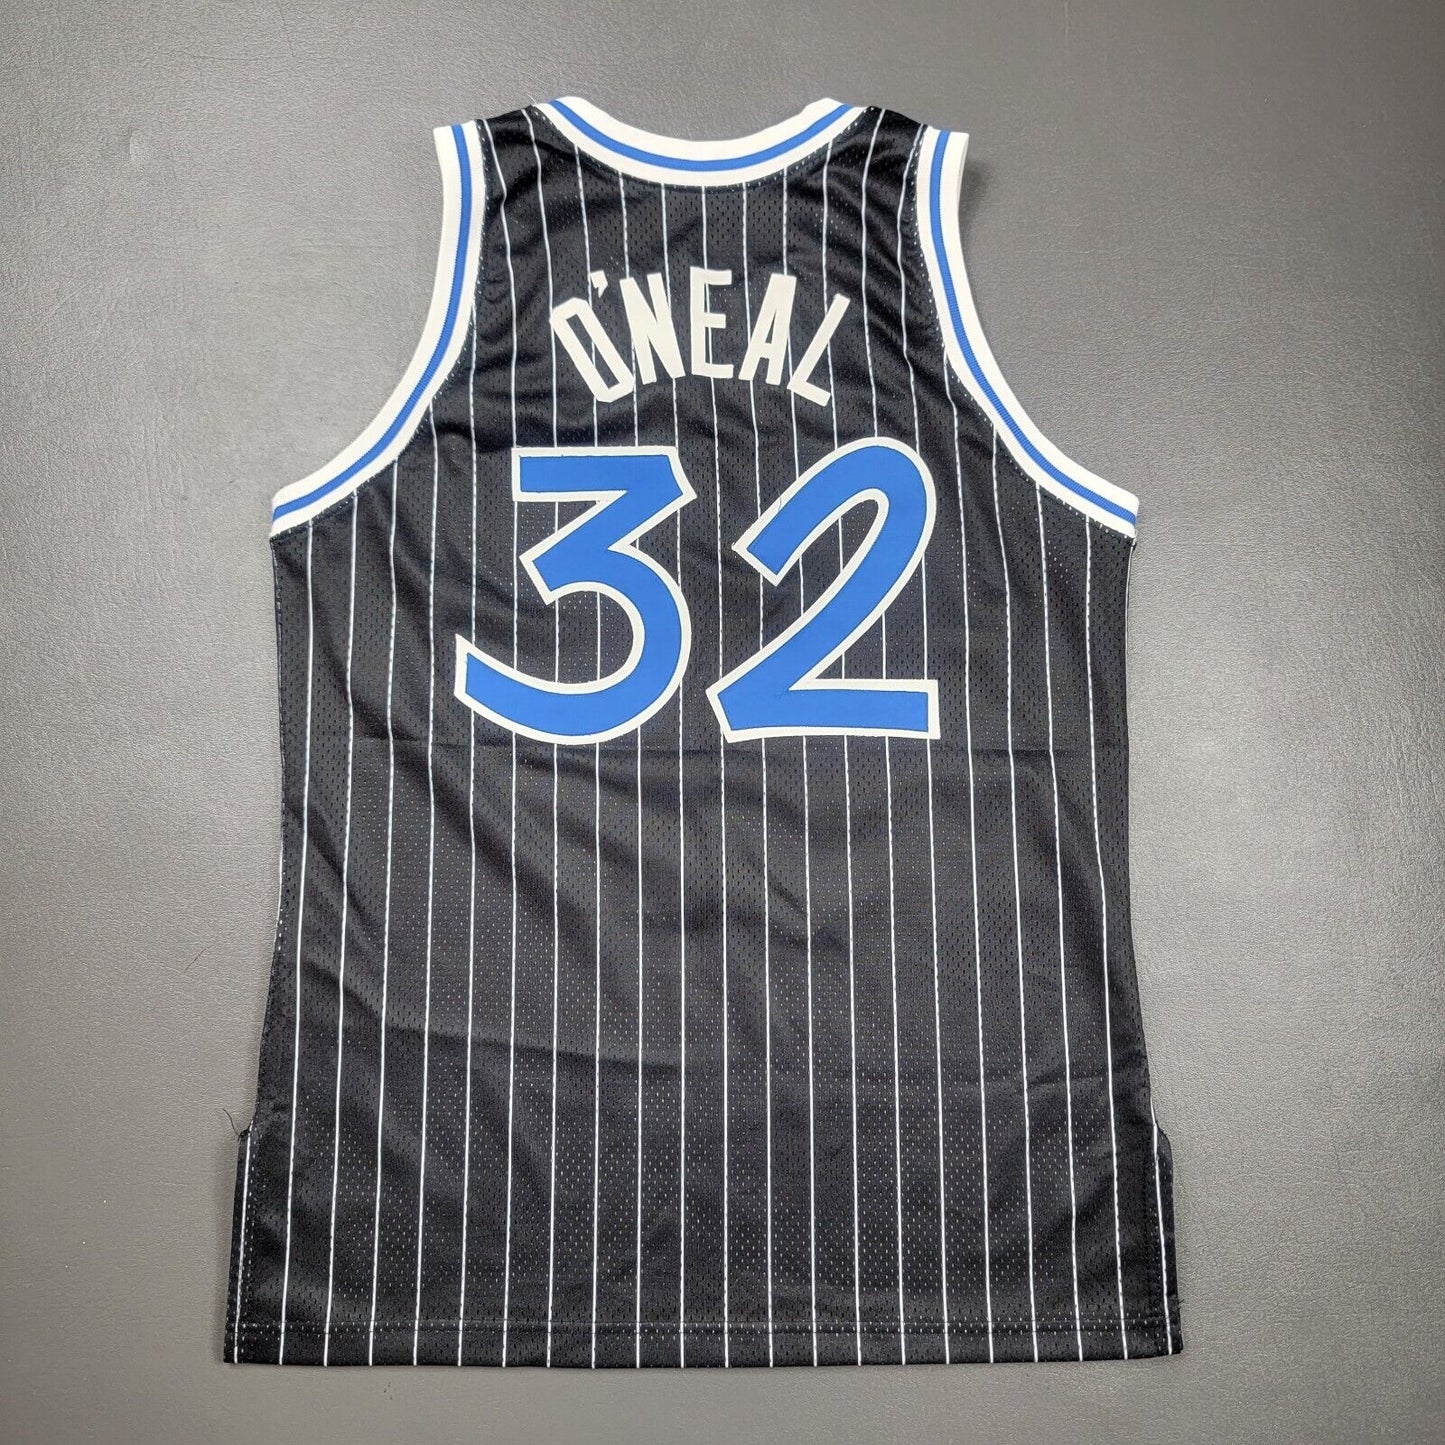 100% Authentic Shaquille O'Neal Vintage Champion Magic Jersey Size 44 L pro cut